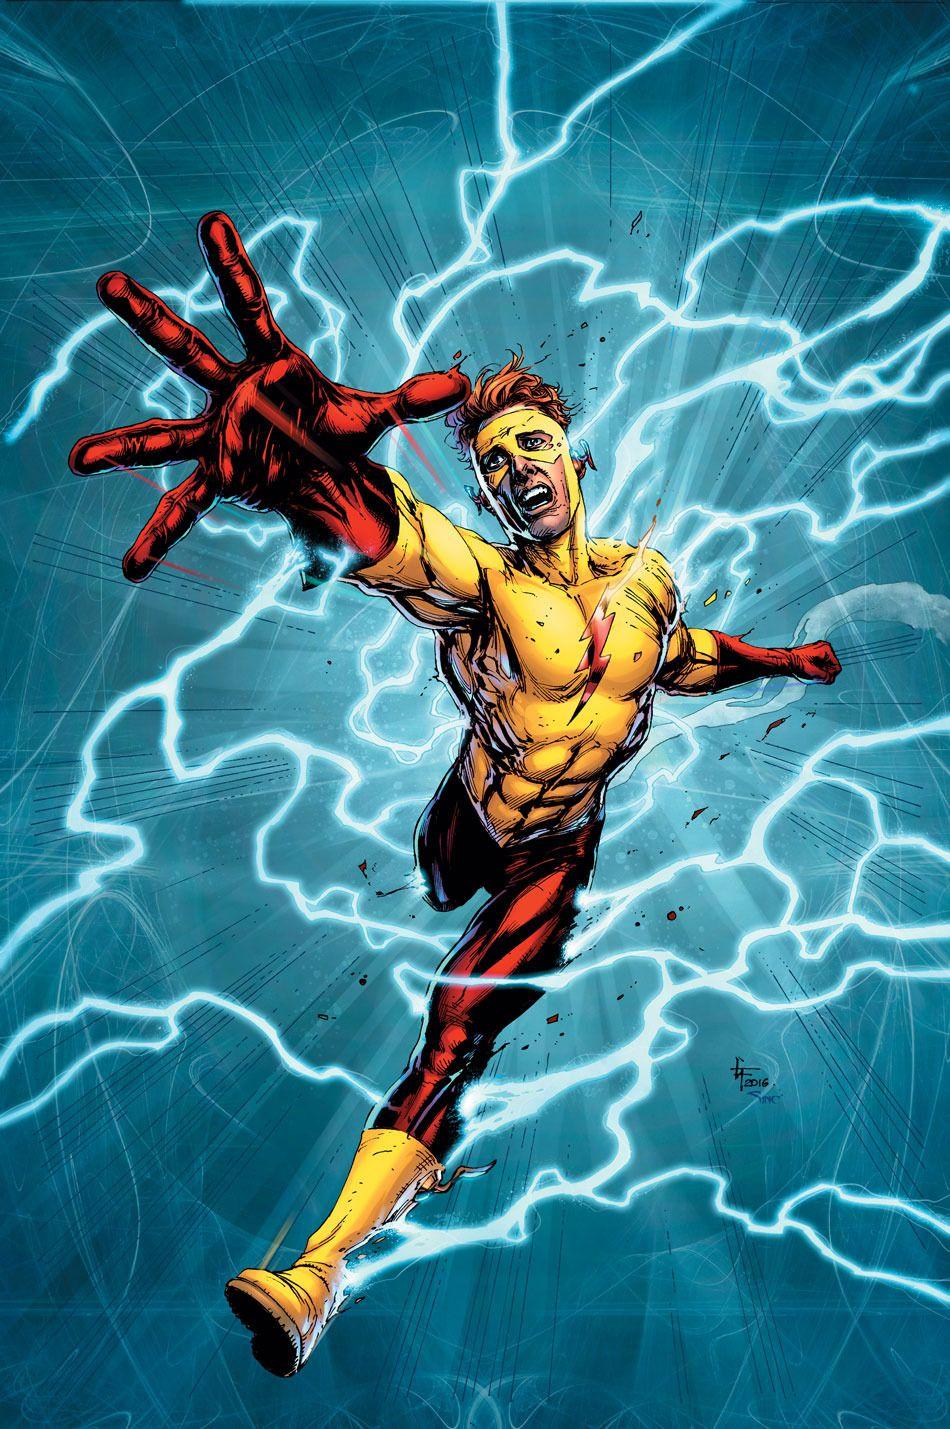 Wally West screenshots, image and picture